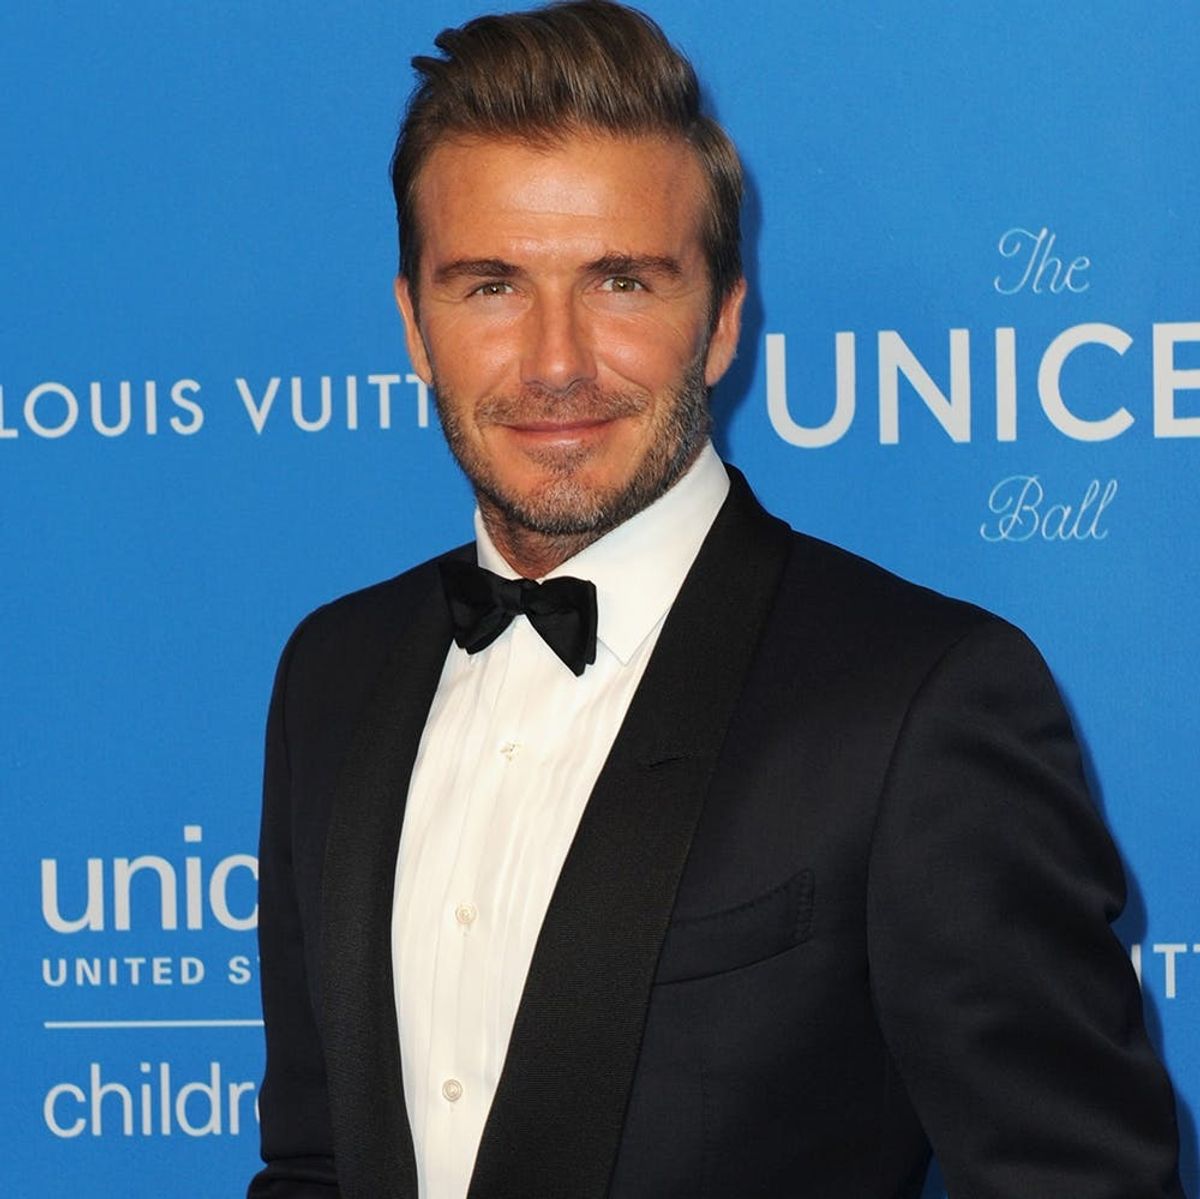 David Beckham Just Shared the Cutest Baby Pic on Instagram